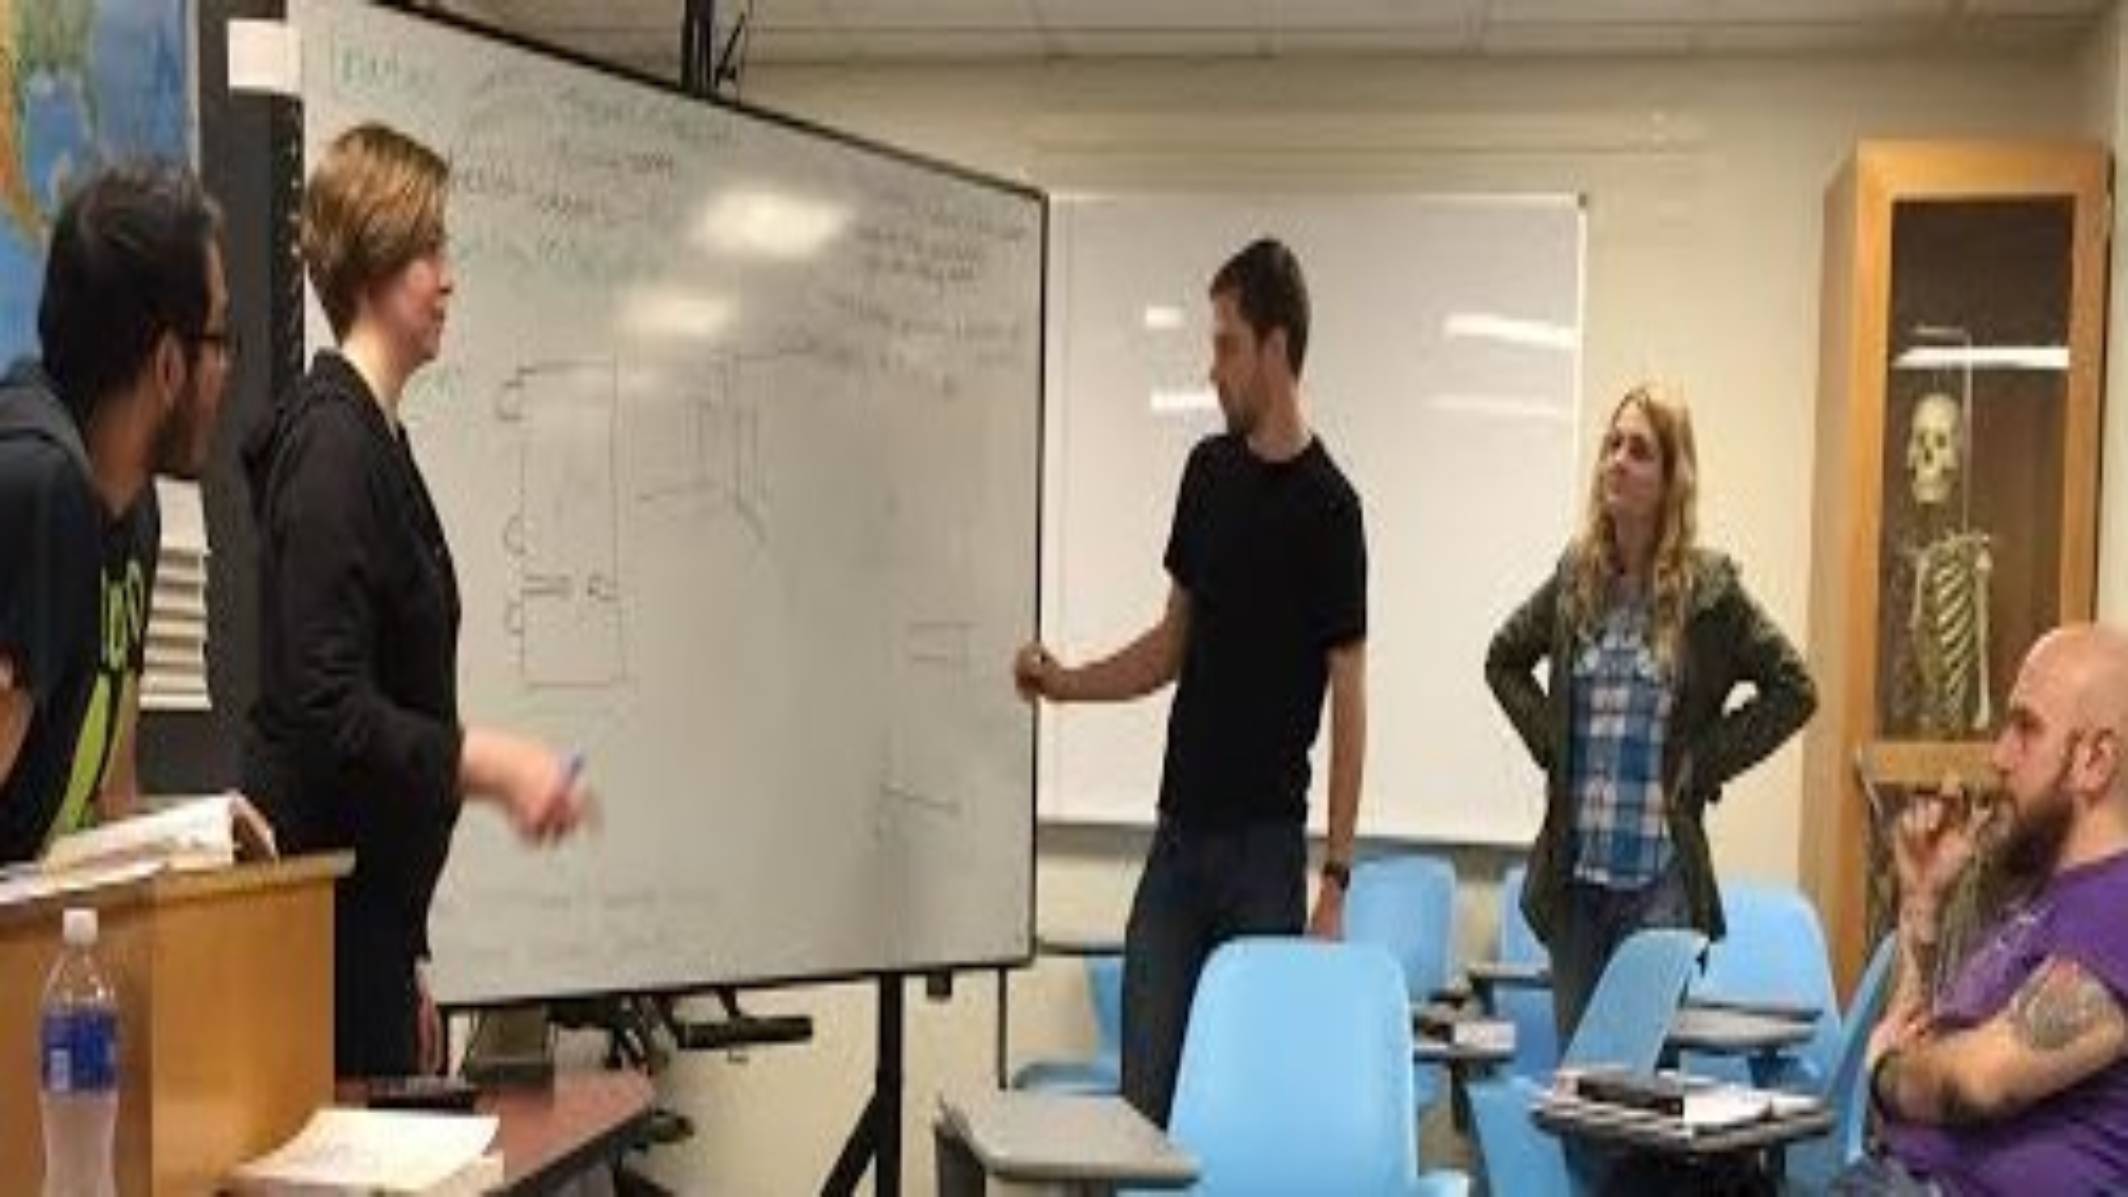 Anthropology students working at a white board